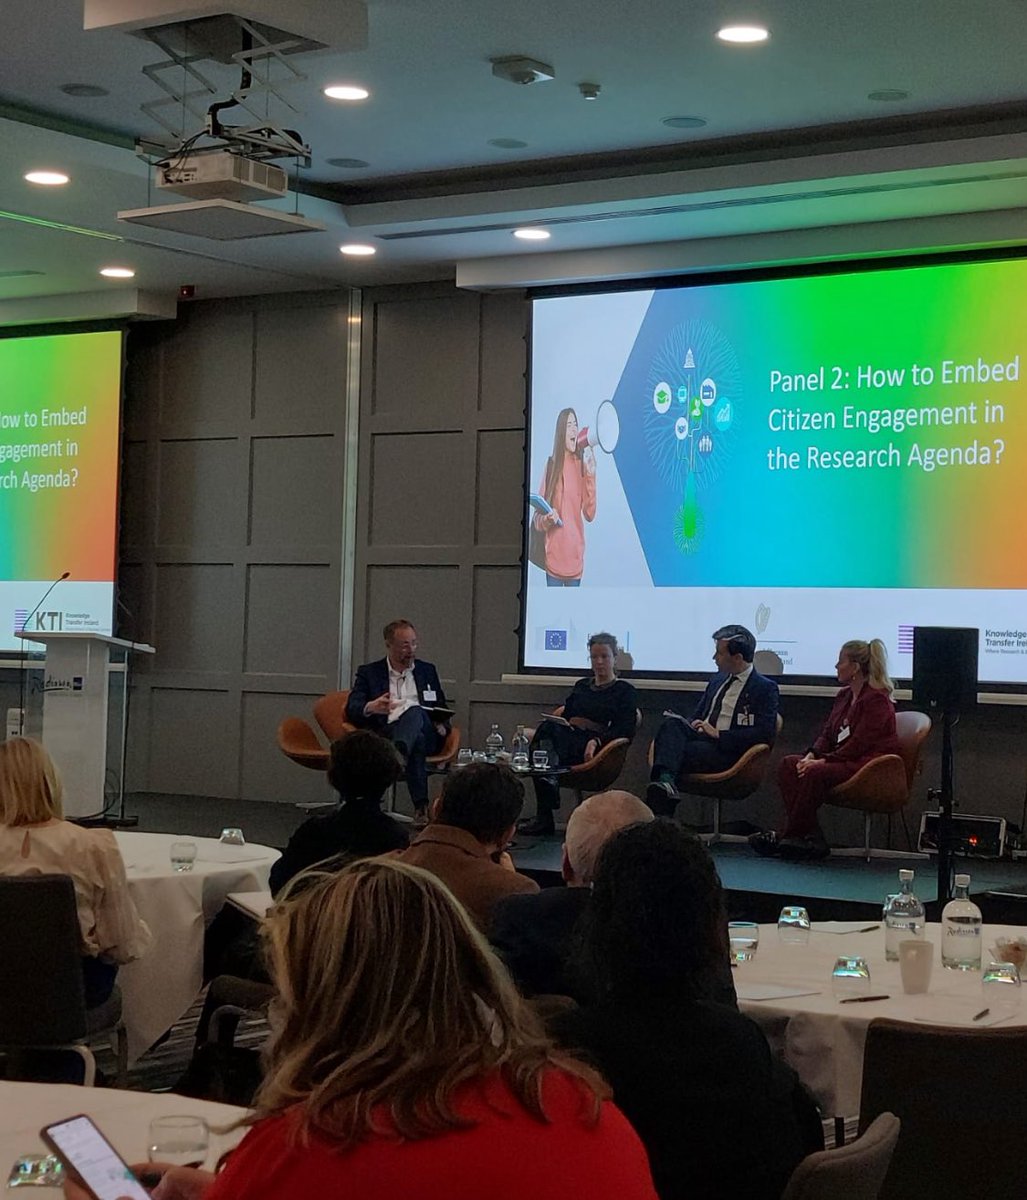 Thank you for @scienceirel for inviting me to be part of ‘Unlocking the Value of Knowledge Transfer’ today #BelieveInScience @IUAofficial @LindaDoyle @tcddublin @TCDVolunteer @trinity